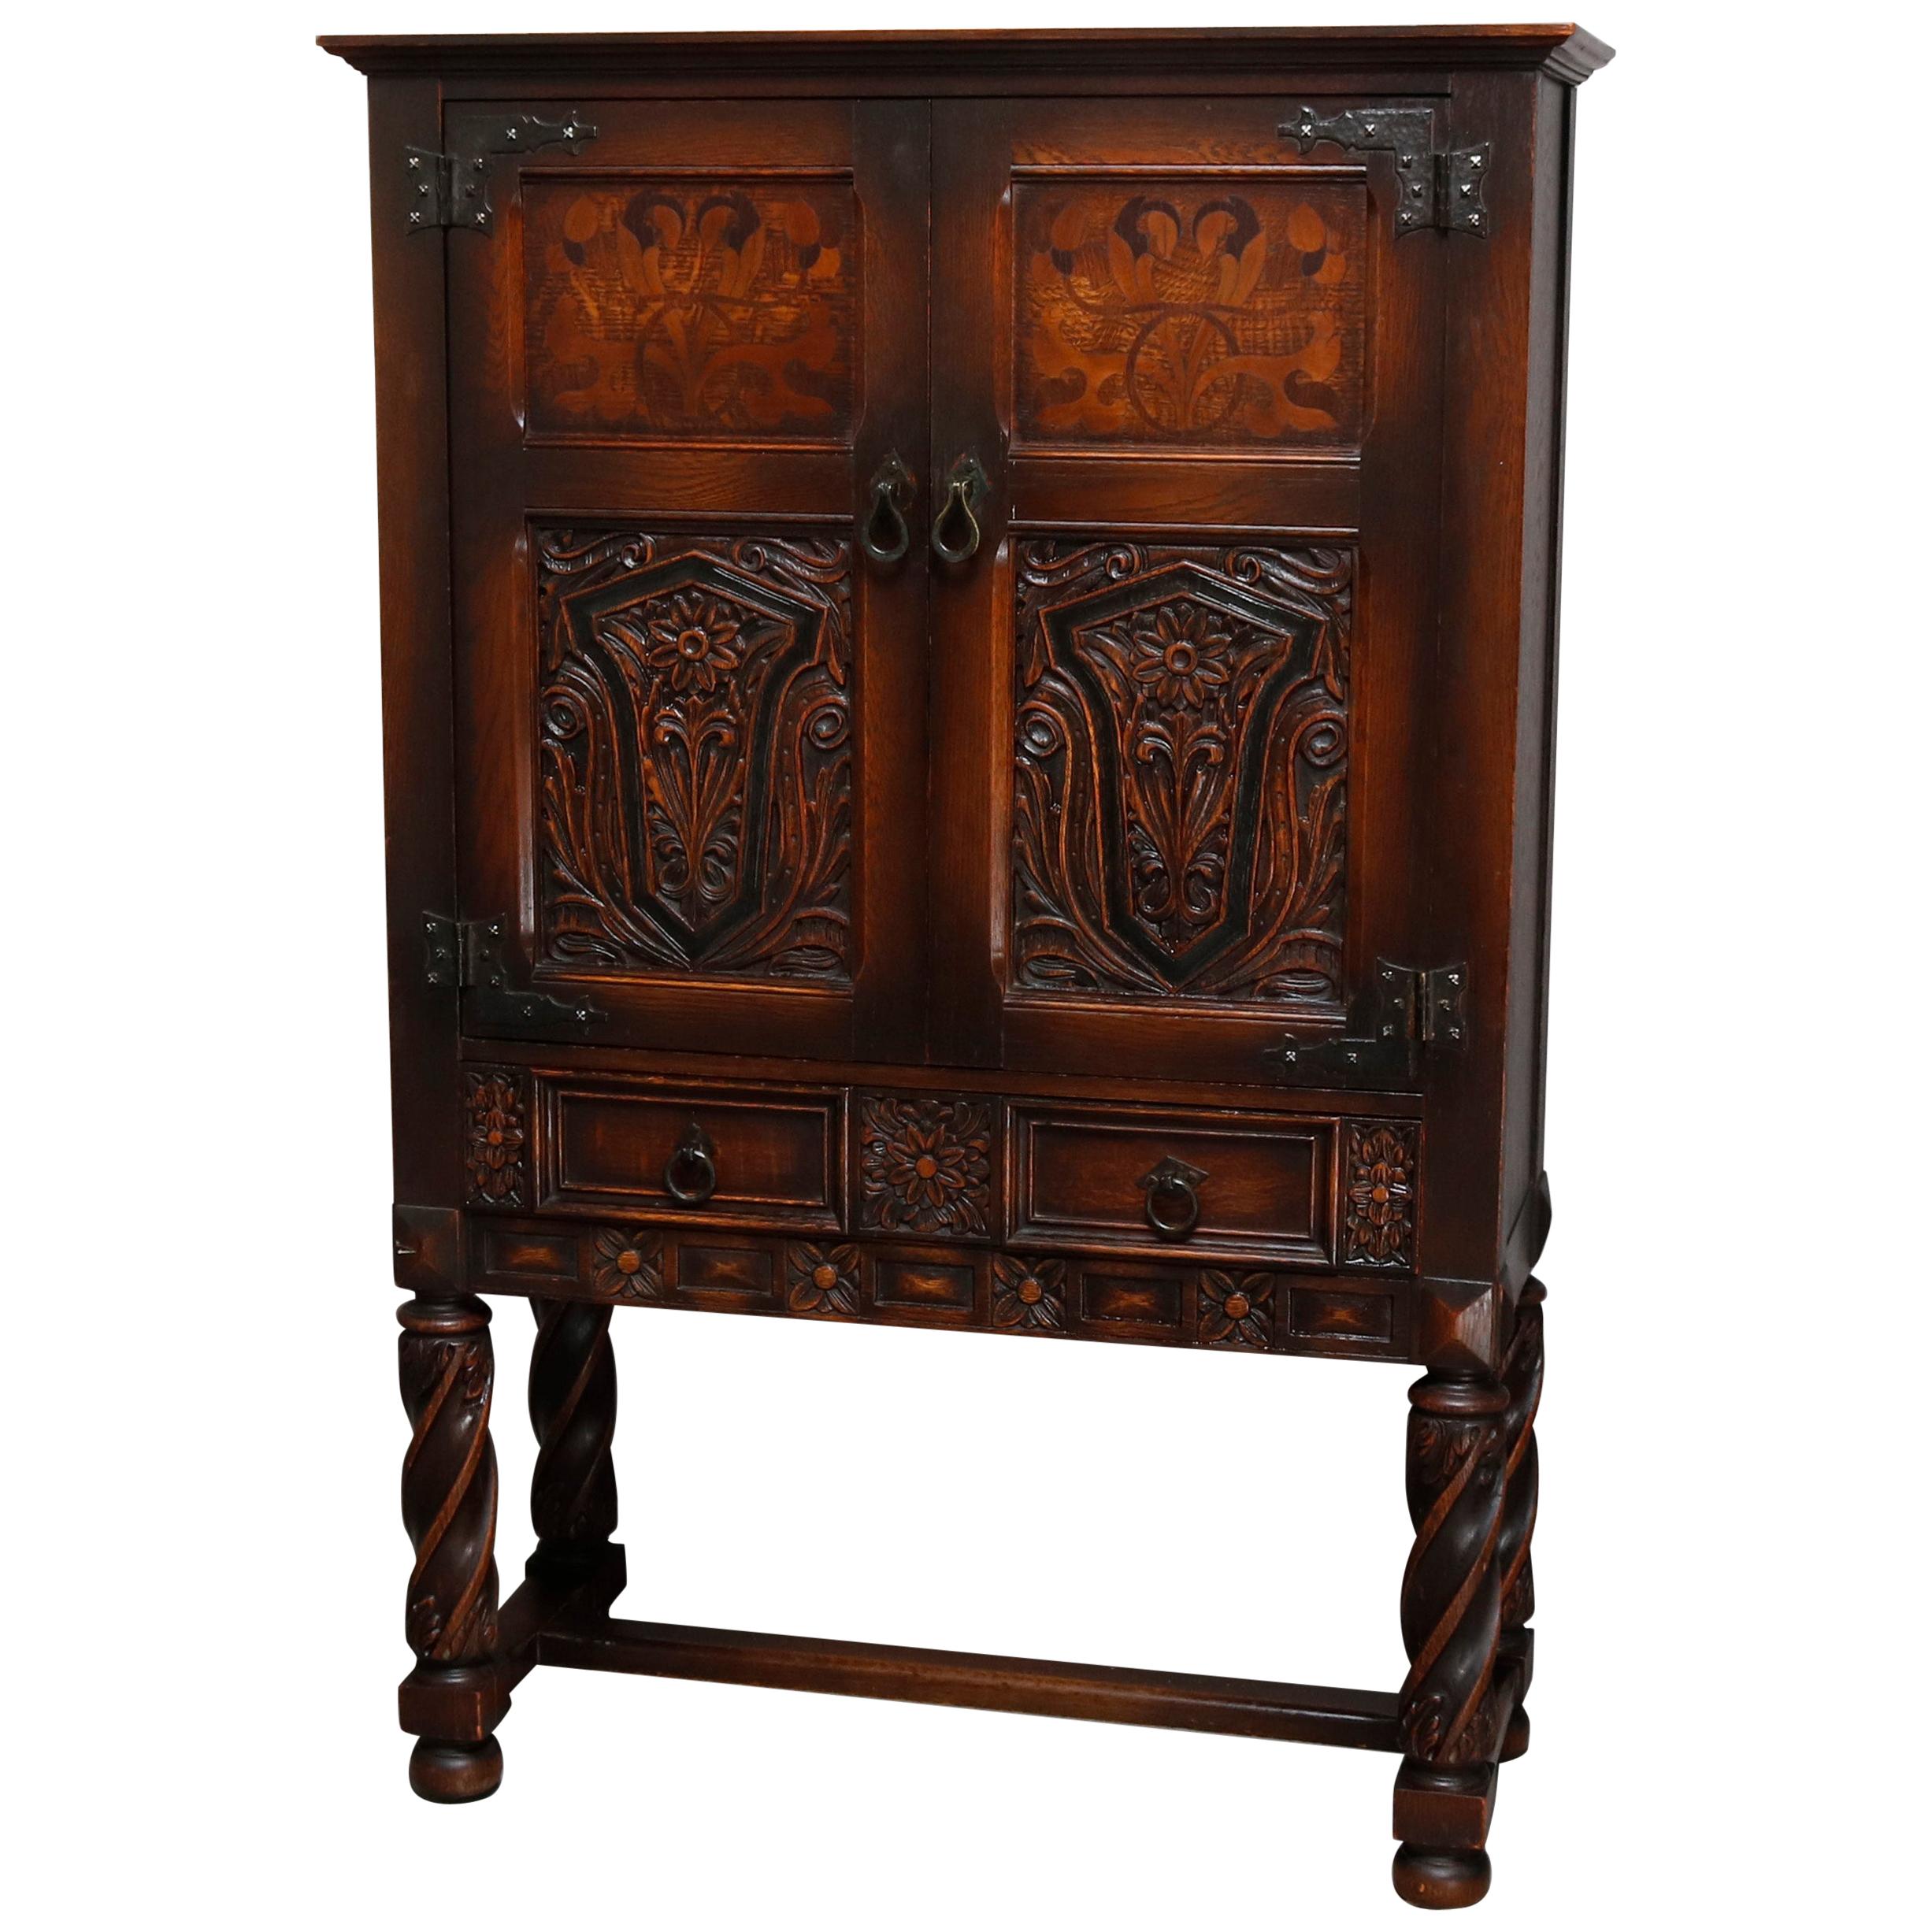 Antique English Edwardian Style Inlaid and Carved Oak China Cabinet, circa 1920